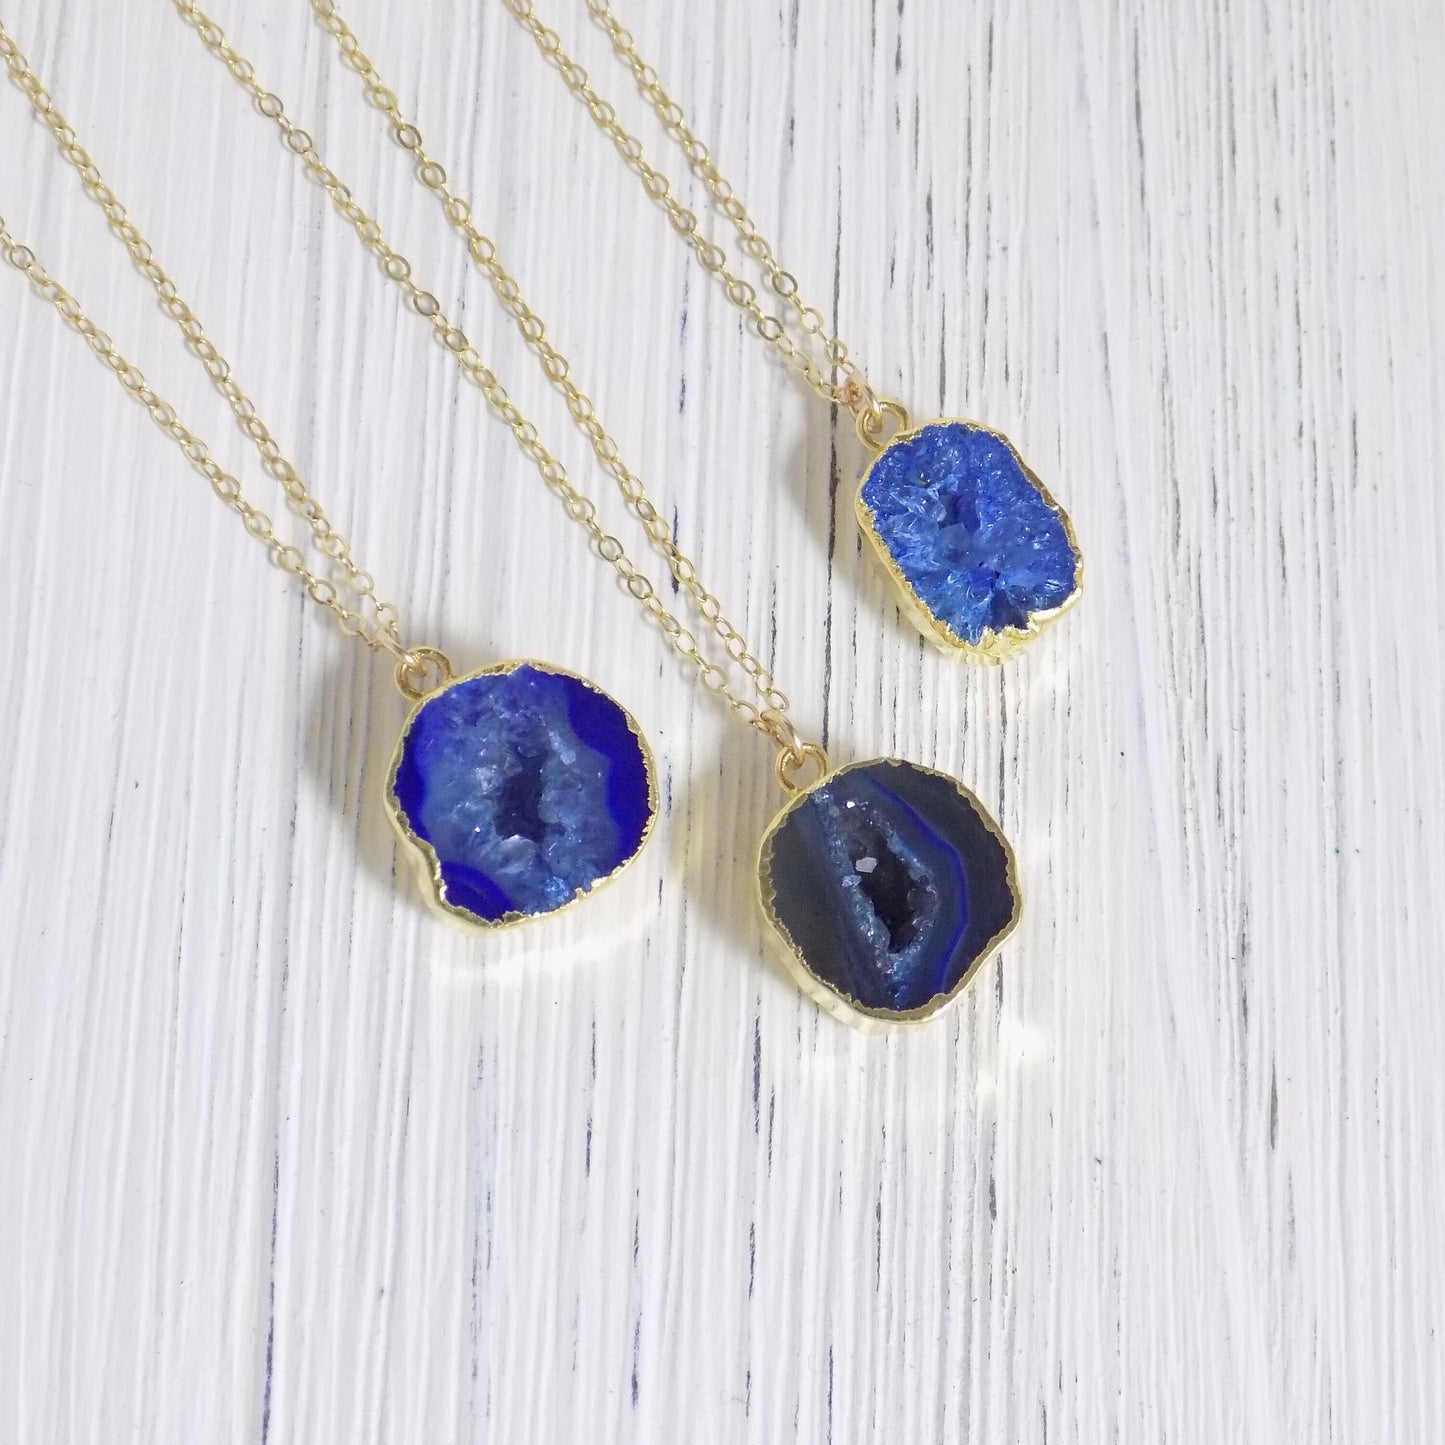 Small Geode Necklace Gold, Blue Geode Cave Pendant Druzy, Raw Natural Stone, Christmas Gift For Daughter, G9-1368